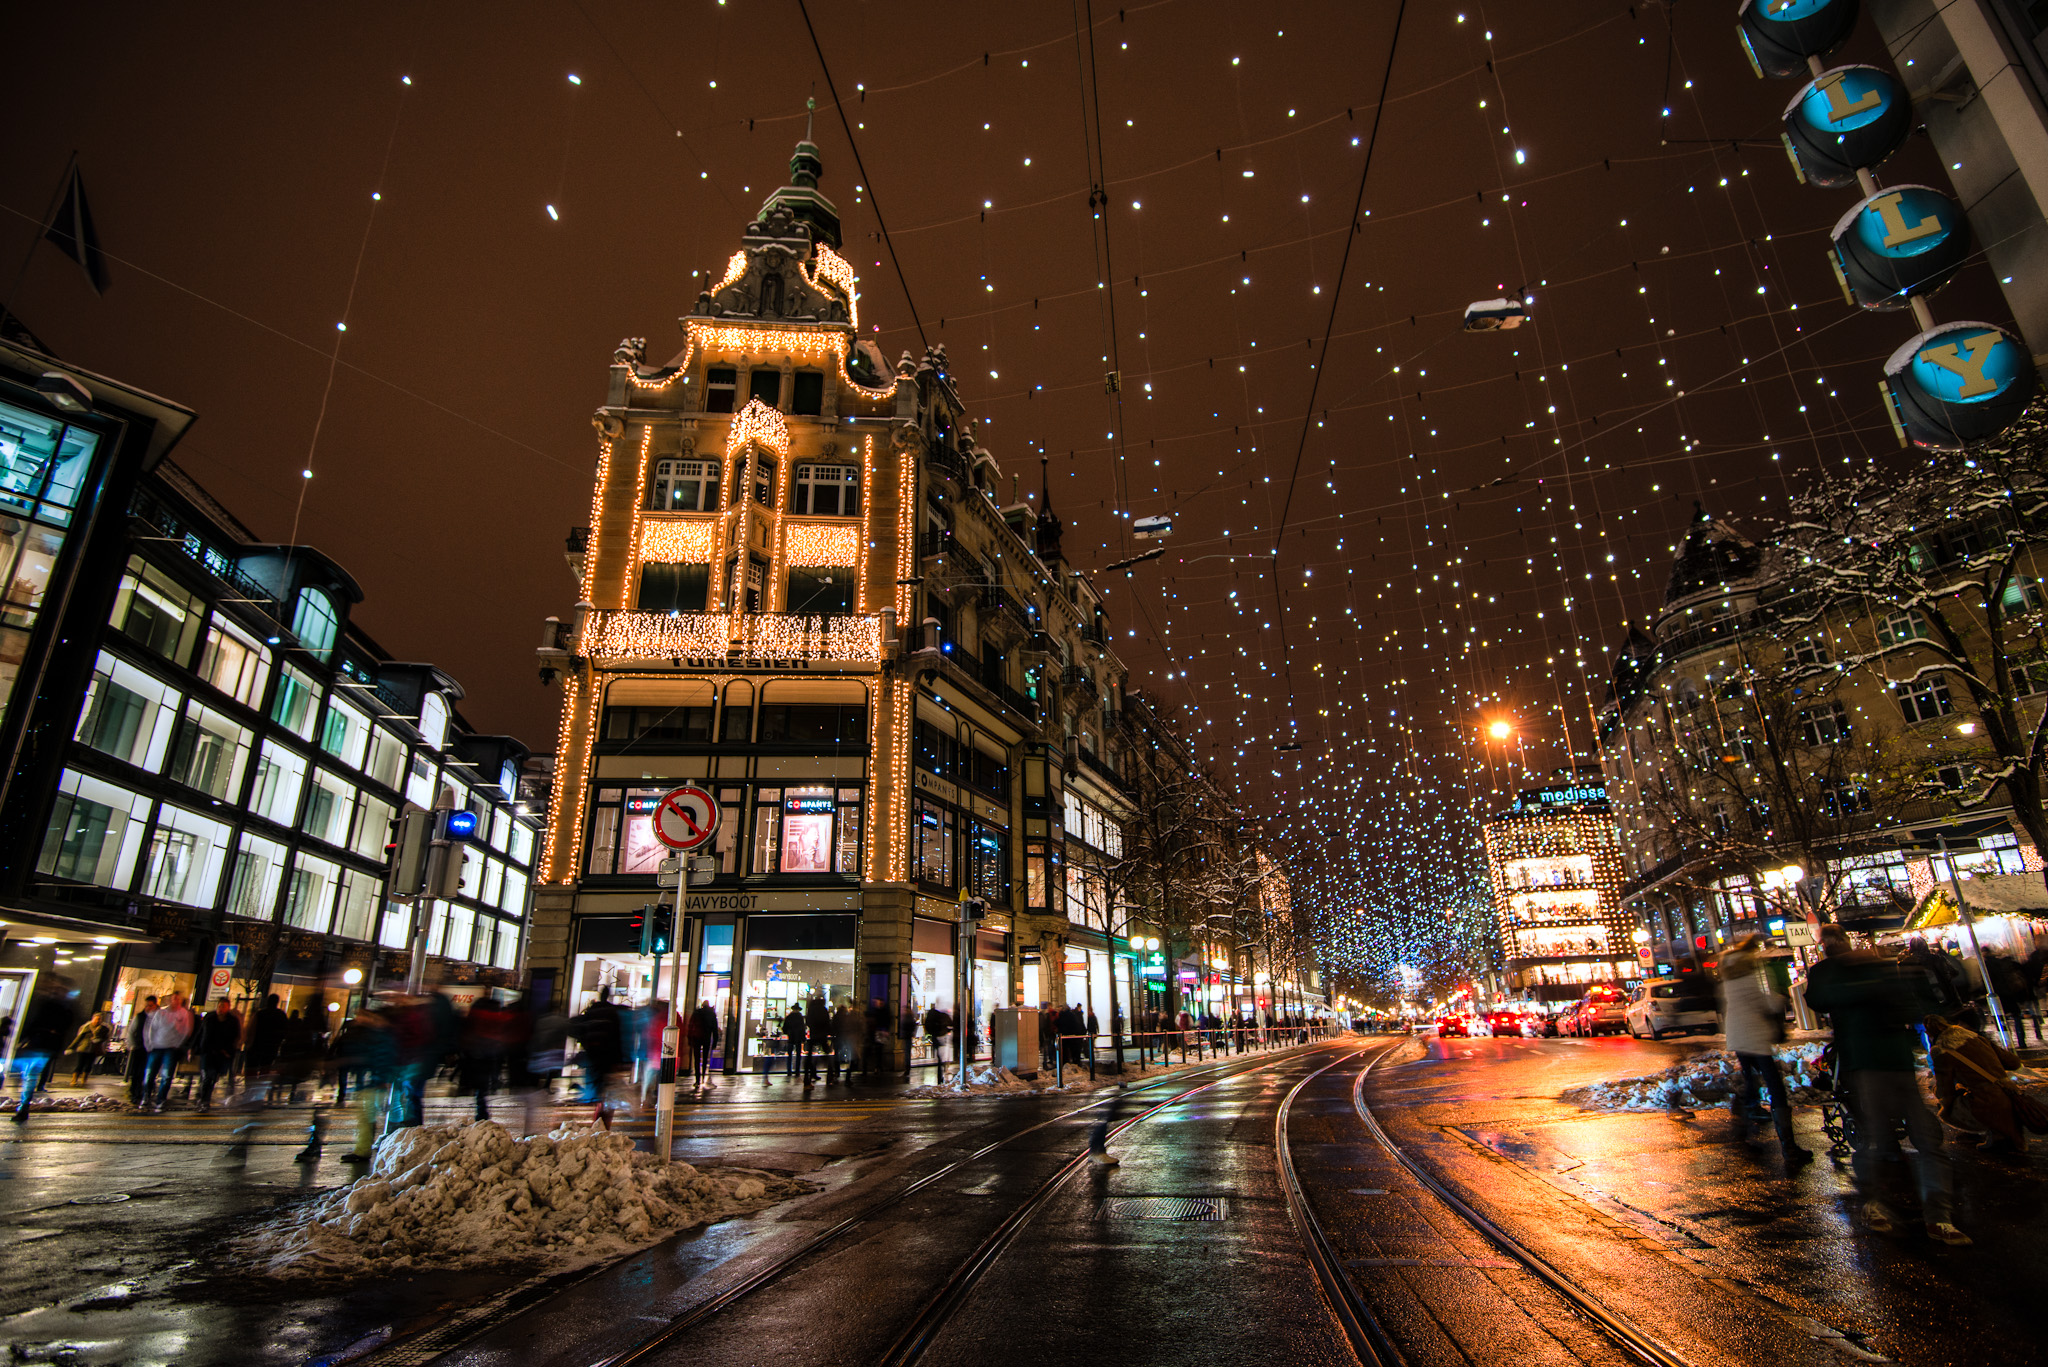 Bahnhofstrasse,Top things to do in Zurich for the perfect break!